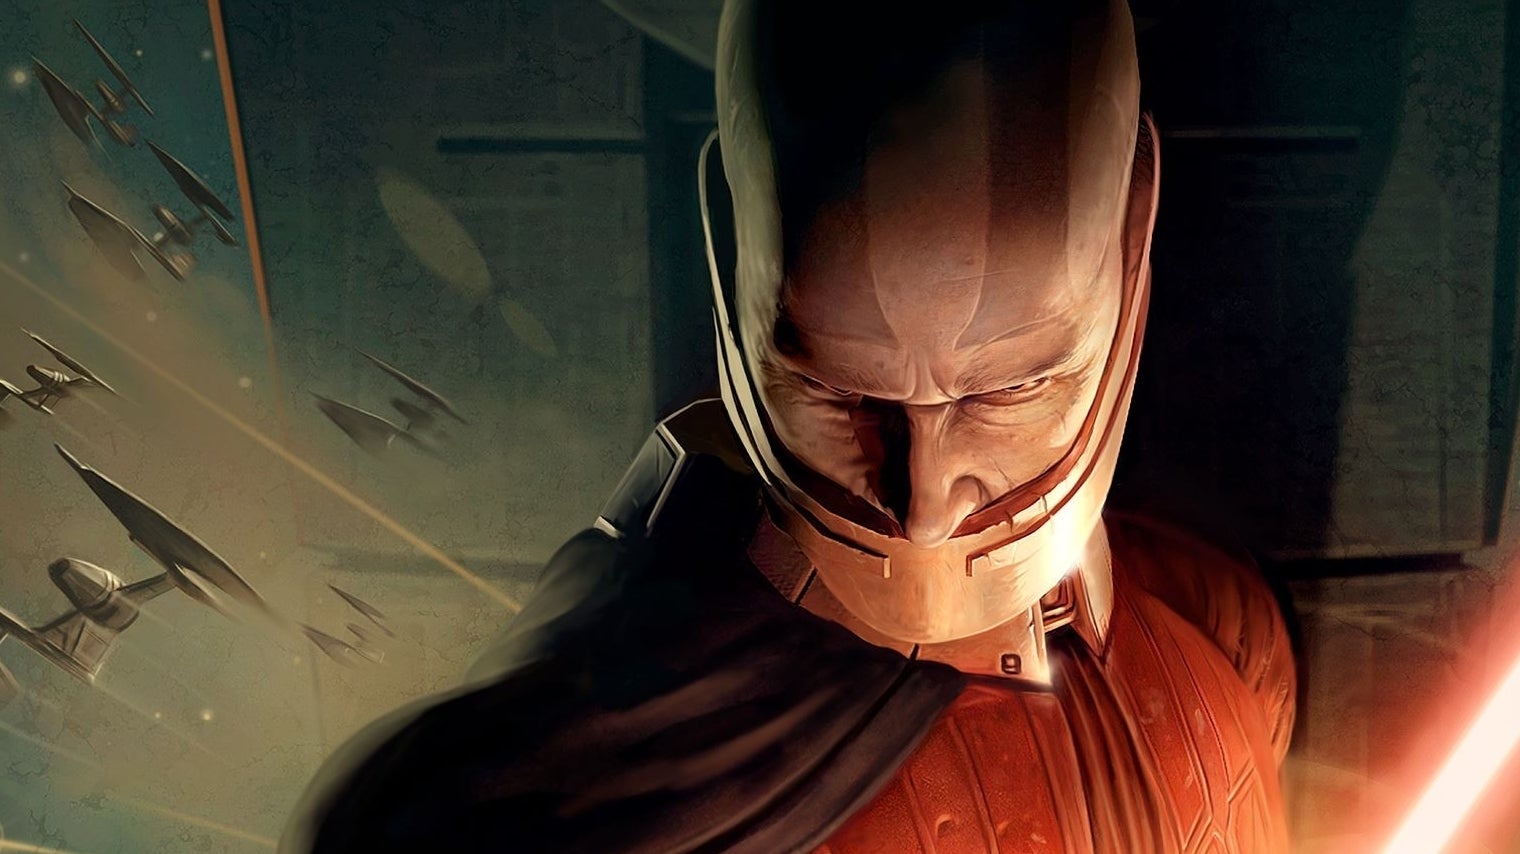 Image for EA's reportedly working on a Star Wars: Knights of the Old Republic reboot